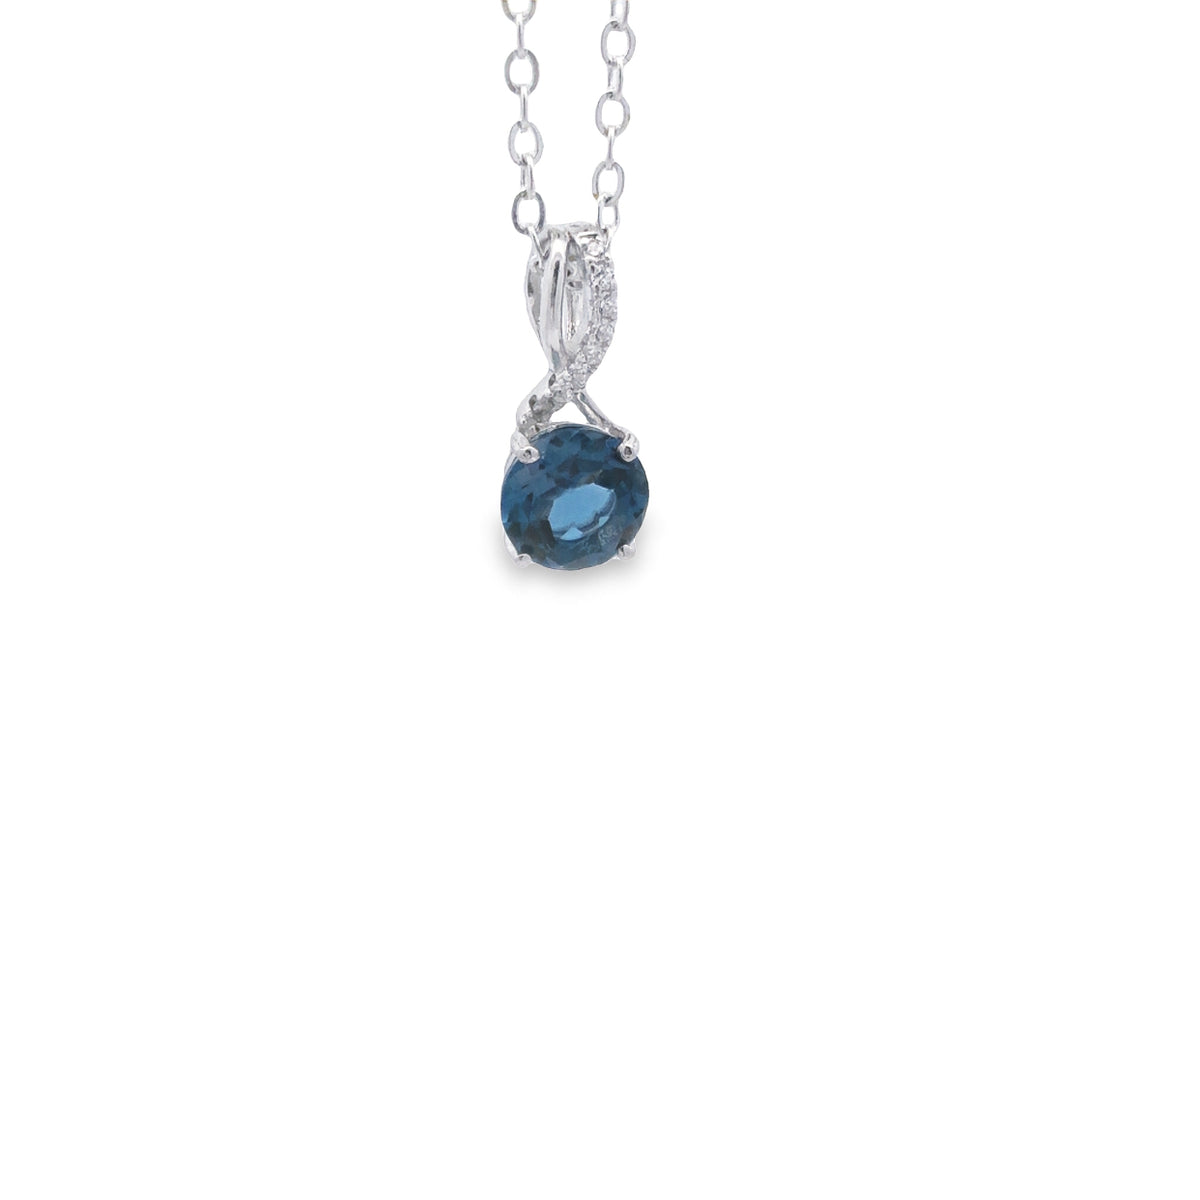 Sterling Silver Rhodium Plated London Blue Topaz And White Cz Set Pendant